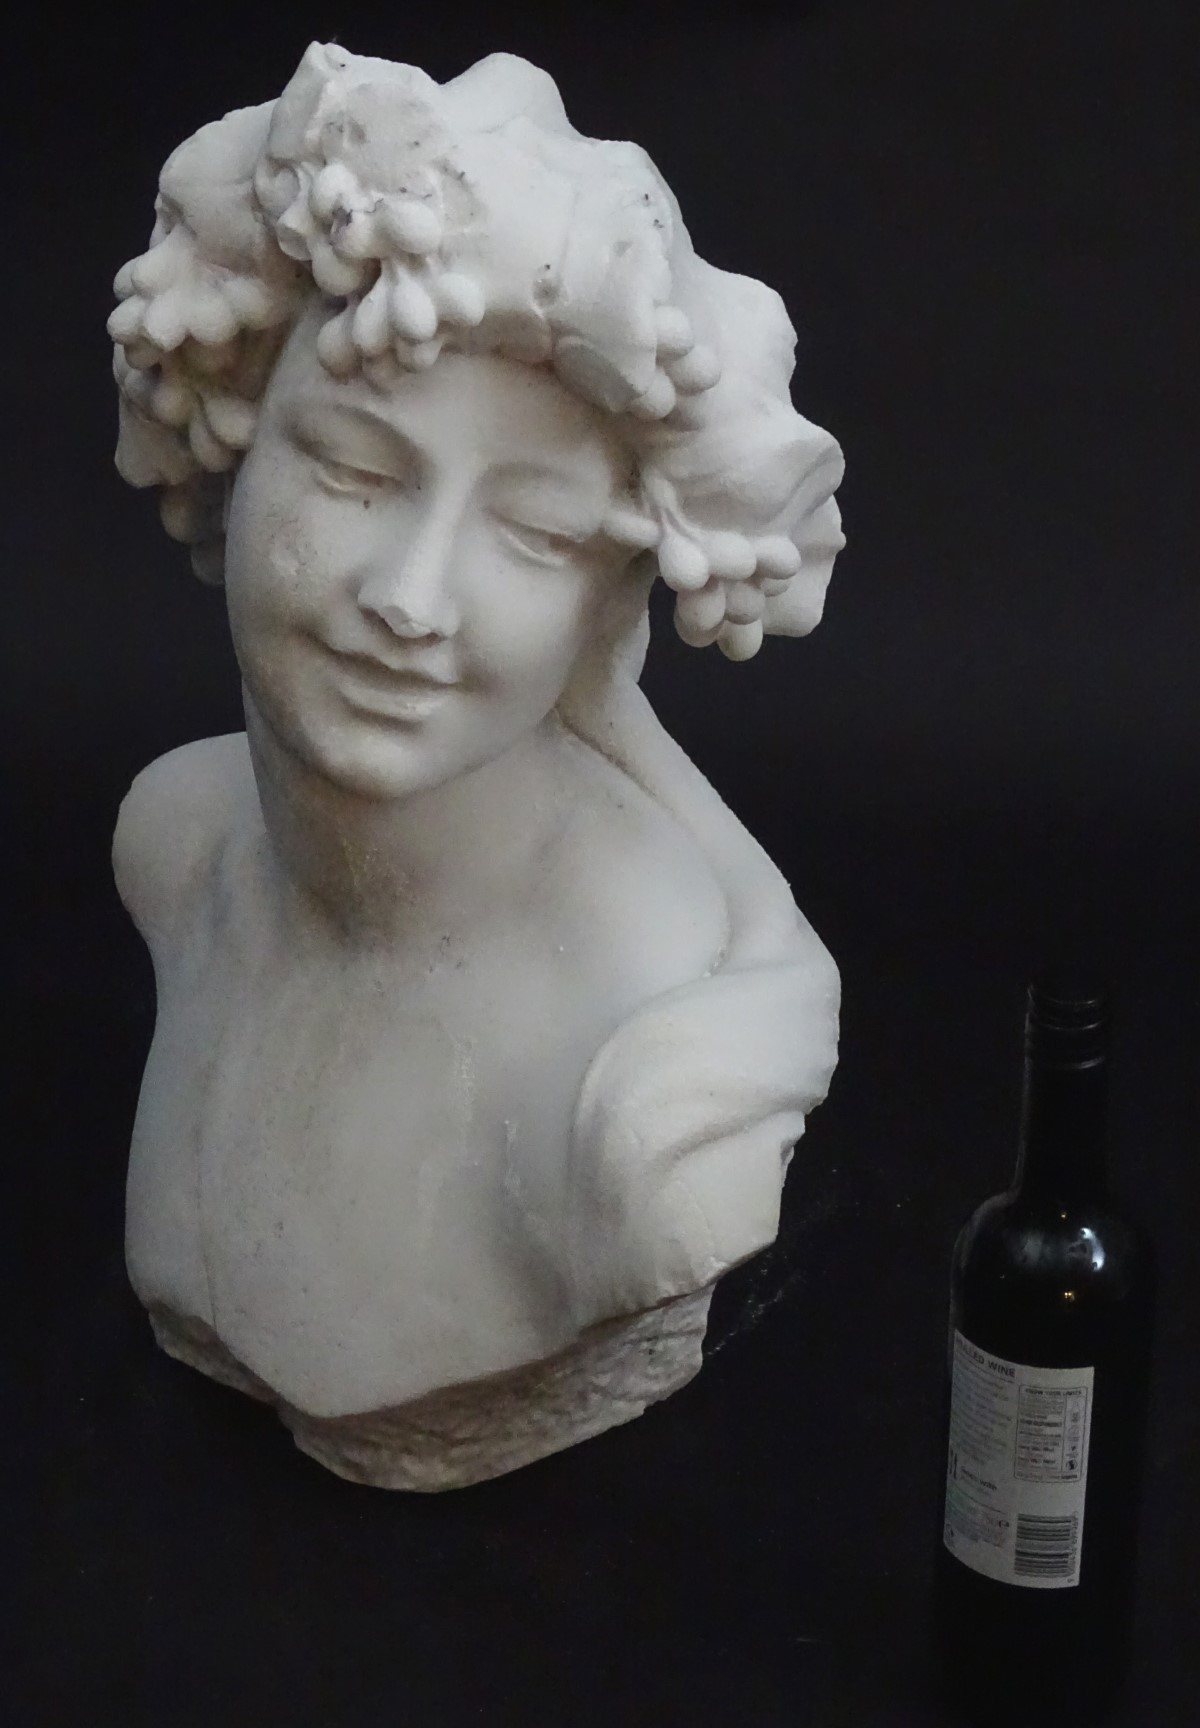 A reconstituted marble sculpture: bust of Bacchus, Roman God of Wine, Agriculture and fertility. - Image 17 of 18